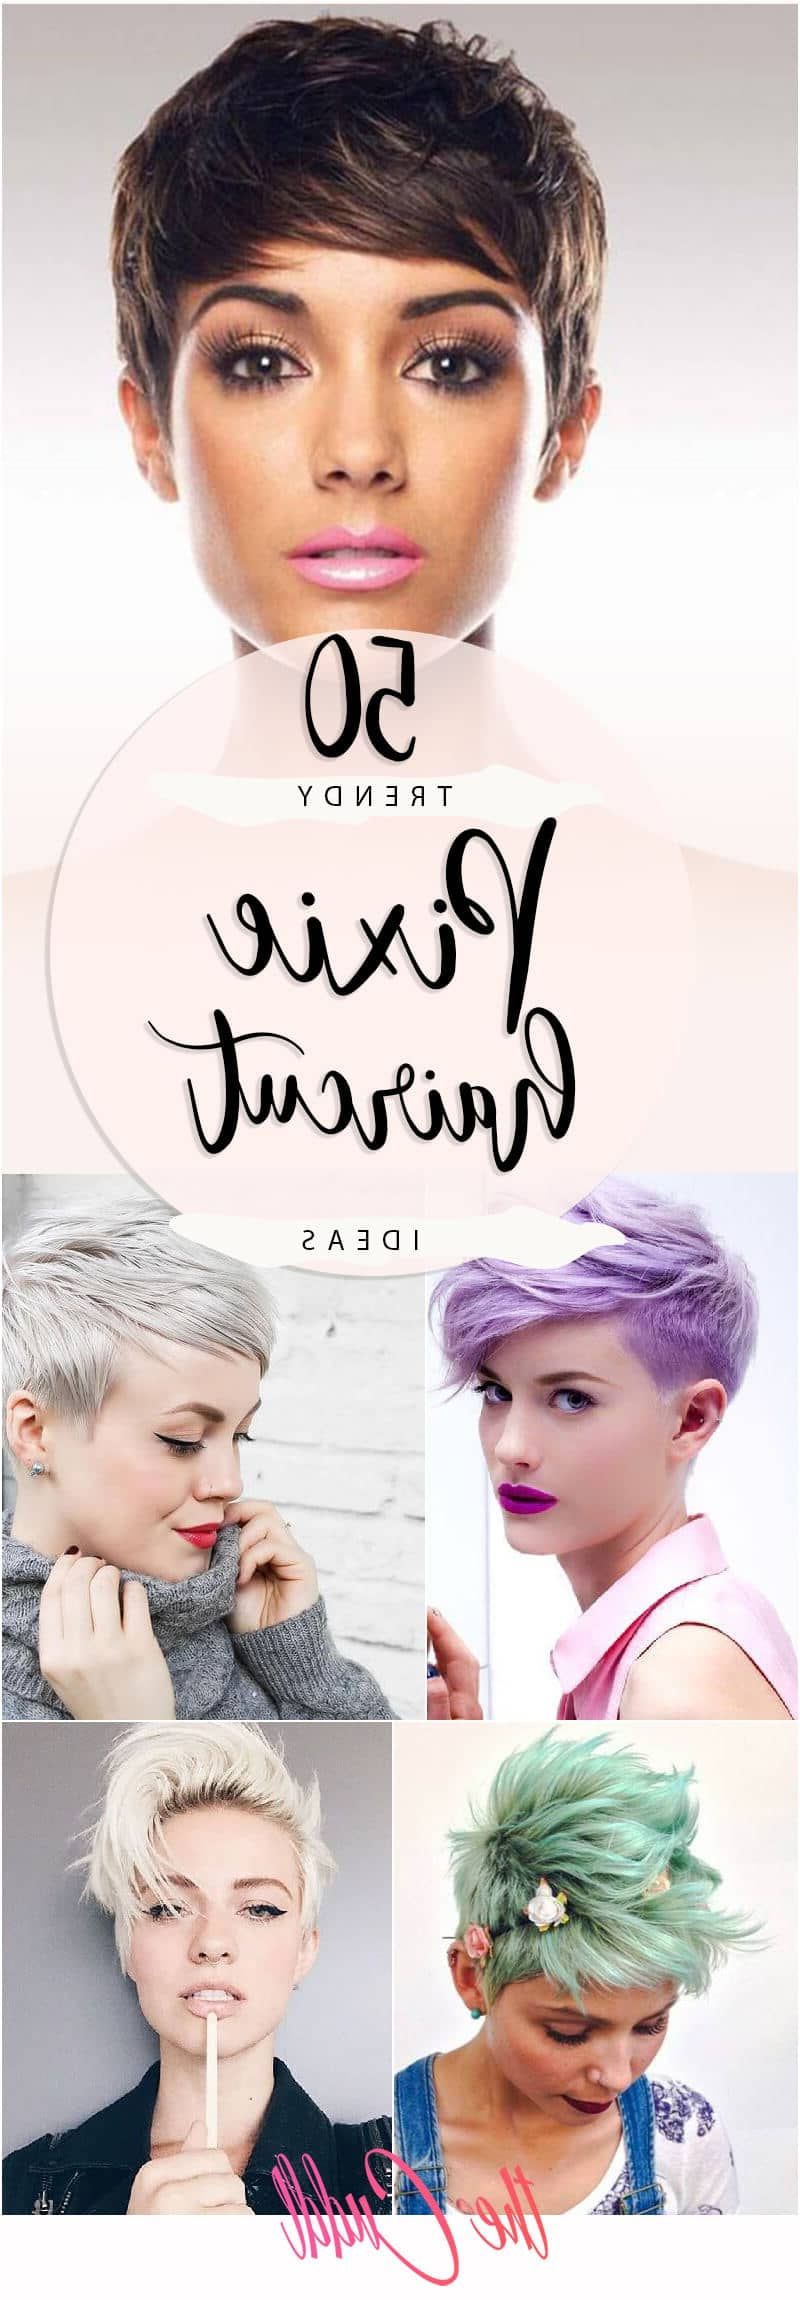 50 Pixie Haircuts You'll See Trending In 2018 Intended For Youthful Pixie Haircuts (View 20 of 20)